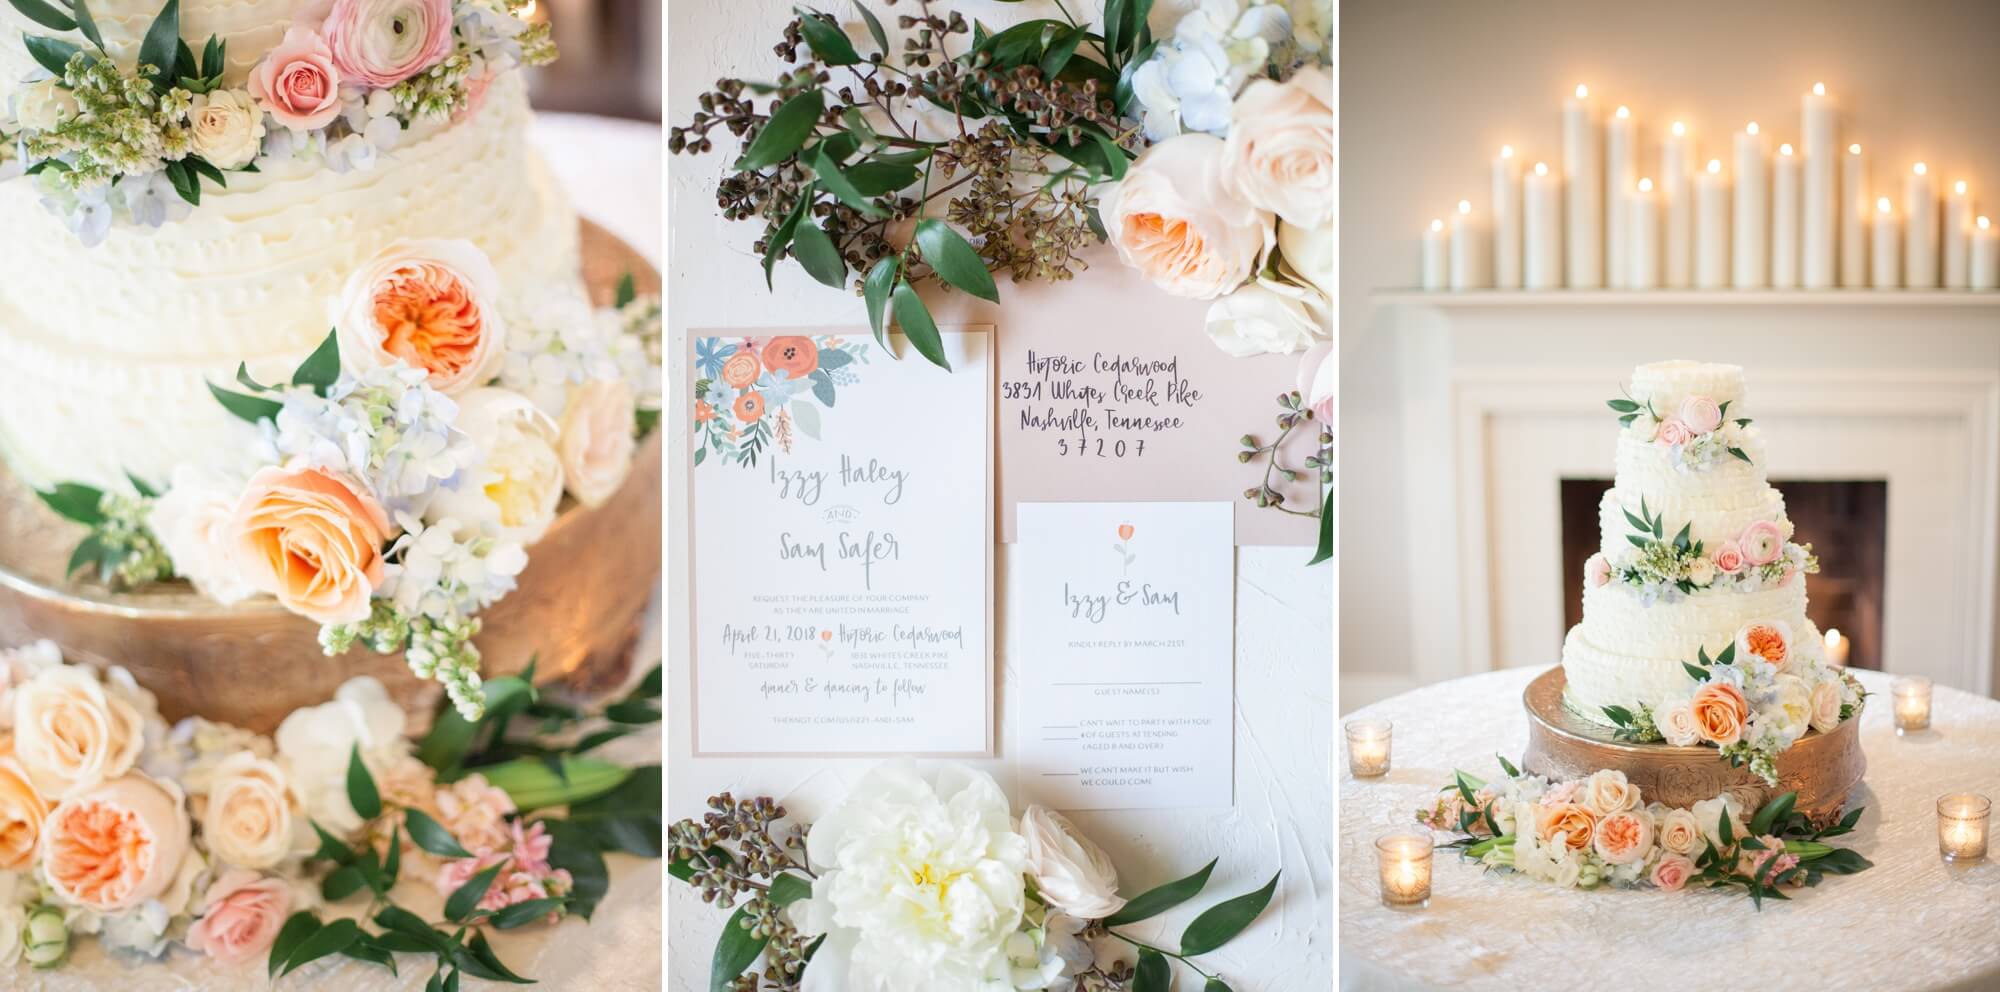 Cake and beautiful invitations at Spring wedding at Cedarwood Weddings in Nashville, TN. Photo by Krista Lee Photography, from Sam and Izzy's wedding day.